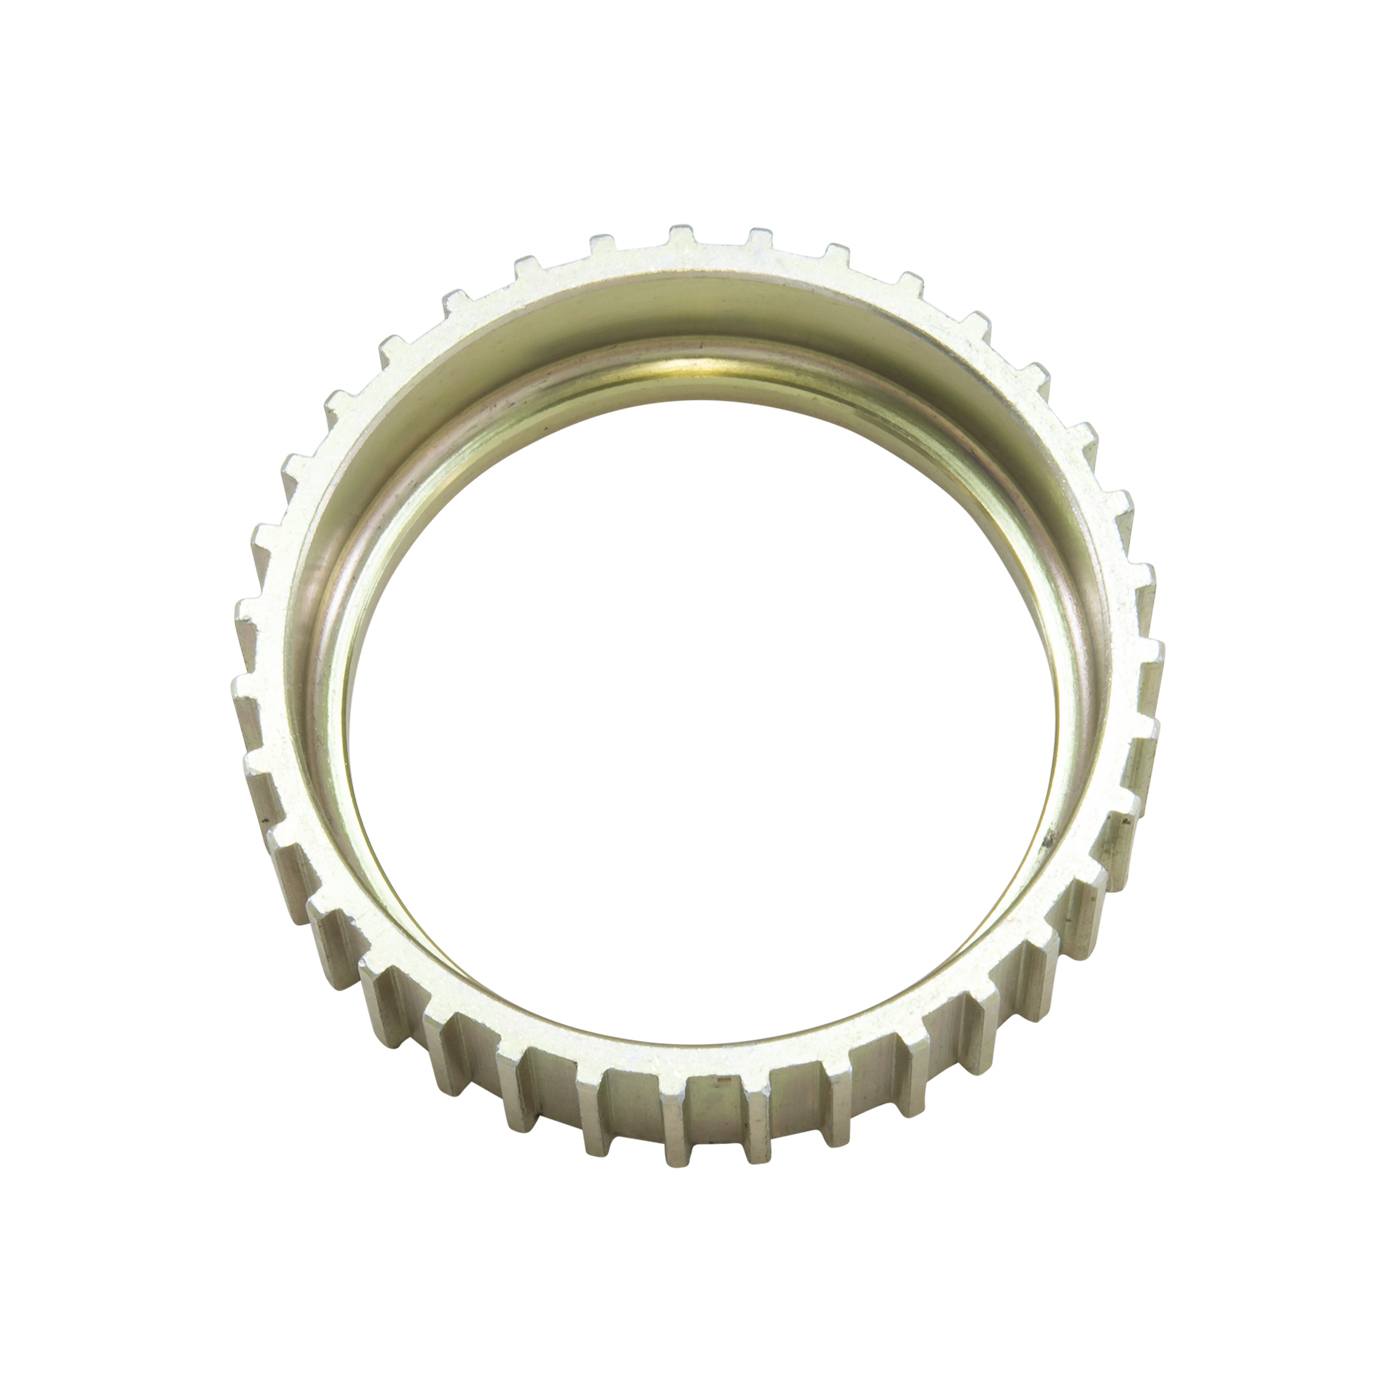 Axle ABS tone ring for '03 & up Crown Victoria, 3.6" diameter, 35 teeth 